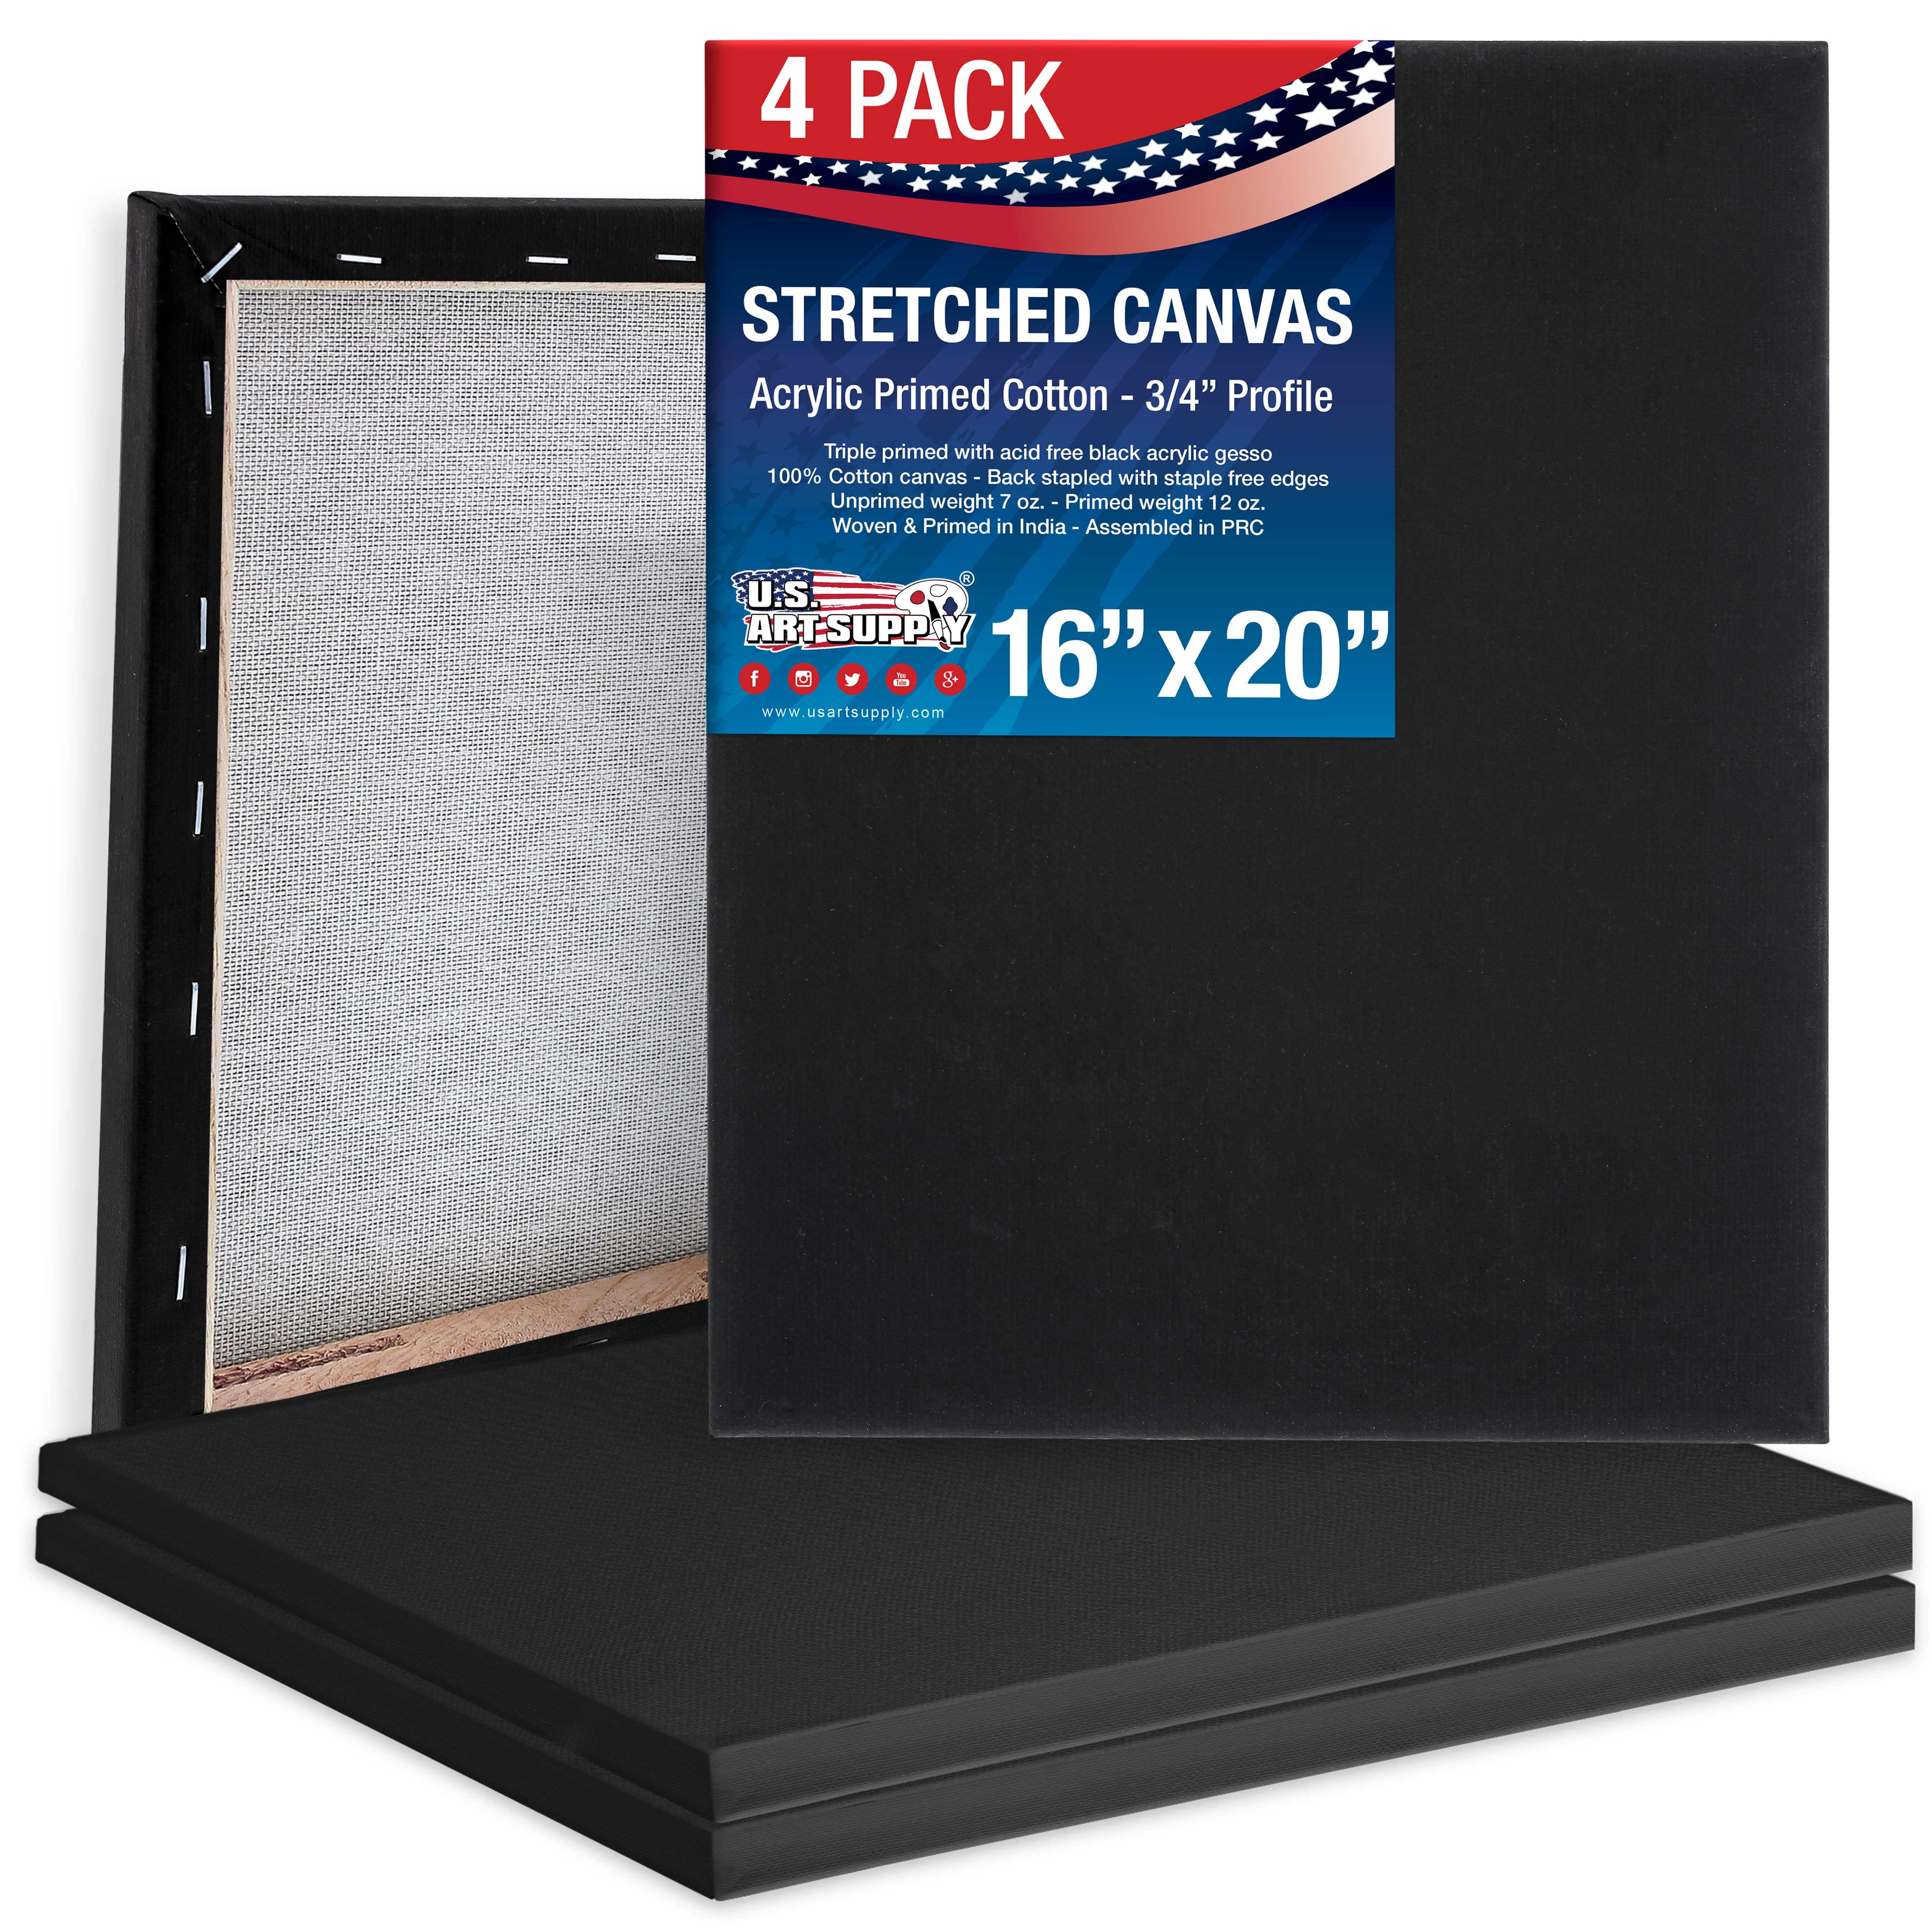 US Art Supply 16 x 20 inch Stretched Canvas Super Value 5-Pack - Triple  Primed Professional Artist Quality White Blank 5/8 Profile, 100% Cotton